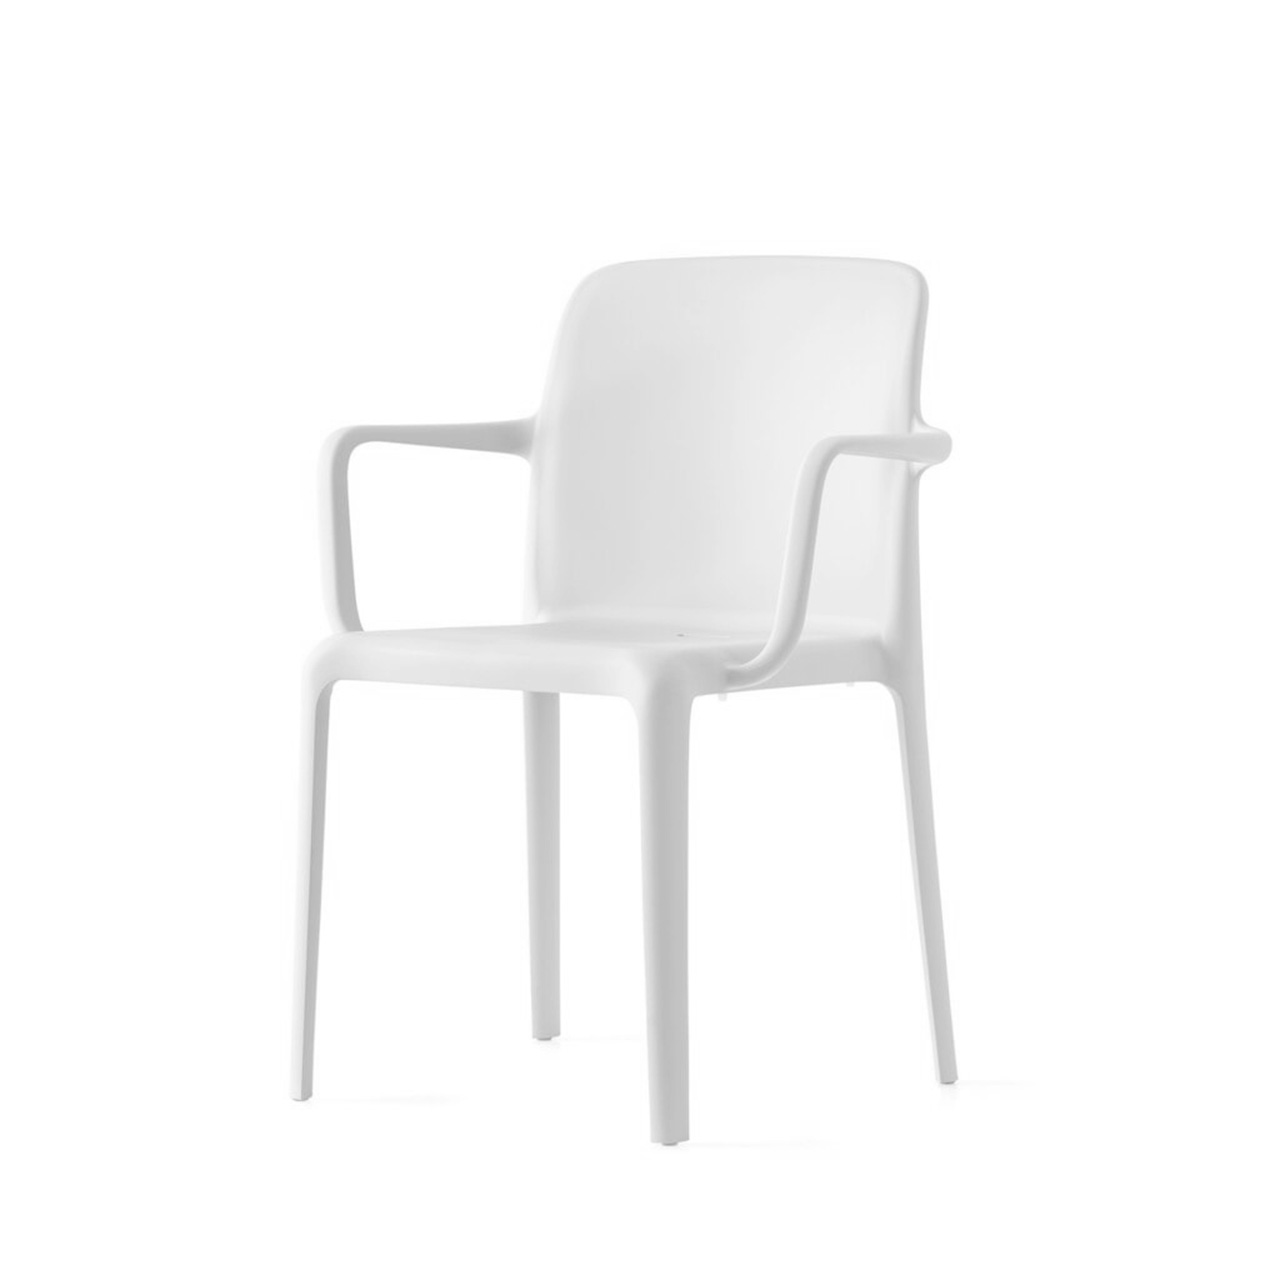 CONNUBIA BY CALLIGARISBAYO ARMCHAIR 바요 암체어 (화이트)MADE IN ITALY